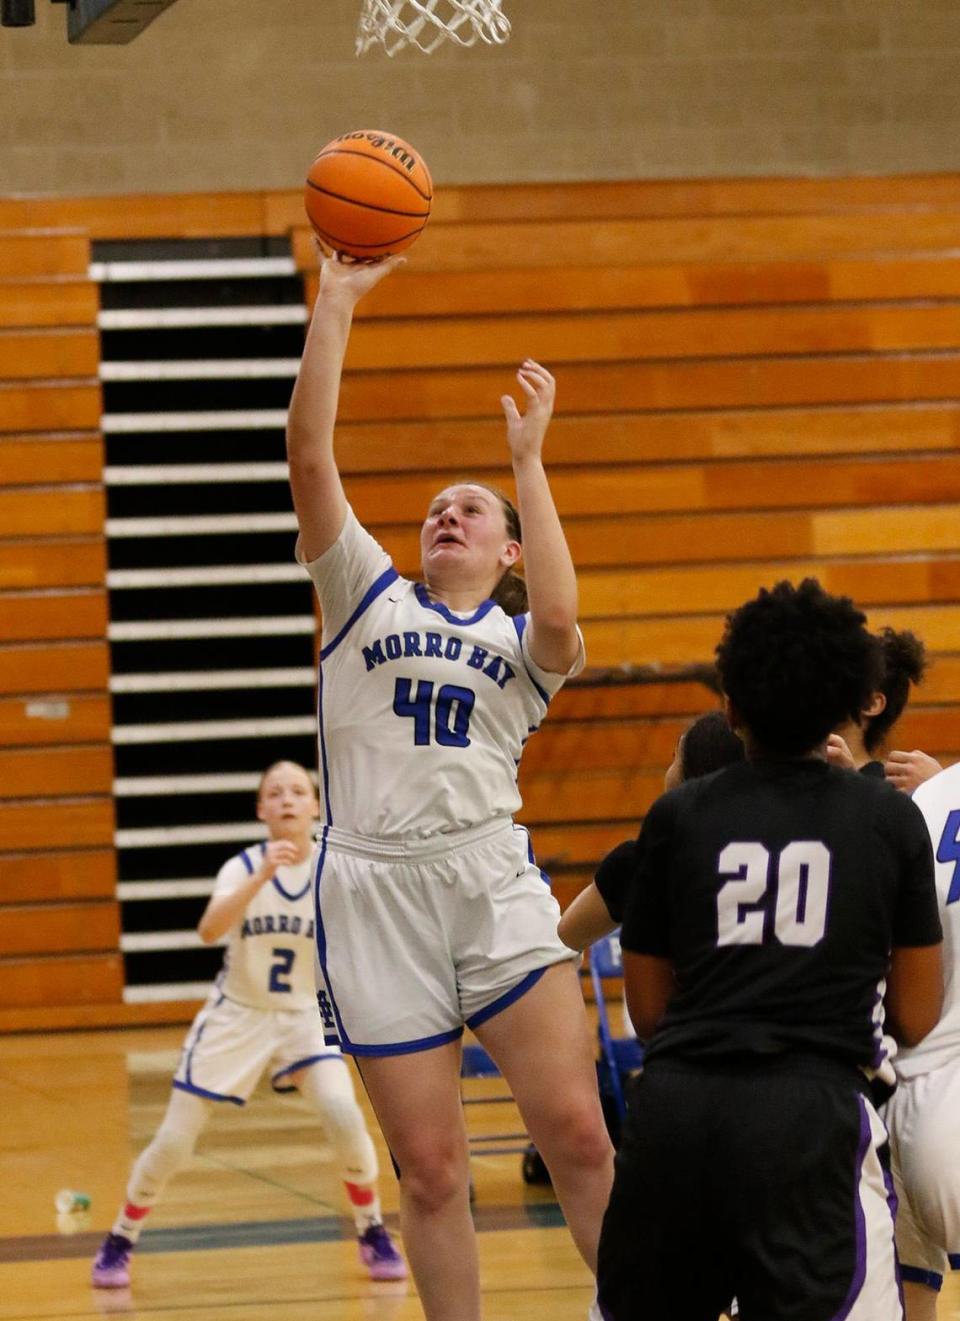 Morro Bay High School girls basketball team beats Rancho Cucamunga 49 - 29 in the CIF state playoffs at Morro Bay High School, Tuesday, Feb. 27, 2024. Tailer Morrison makes one of the many baskets in this game. Rancho Cucamunga Zara Ahaiwe (20) watches.